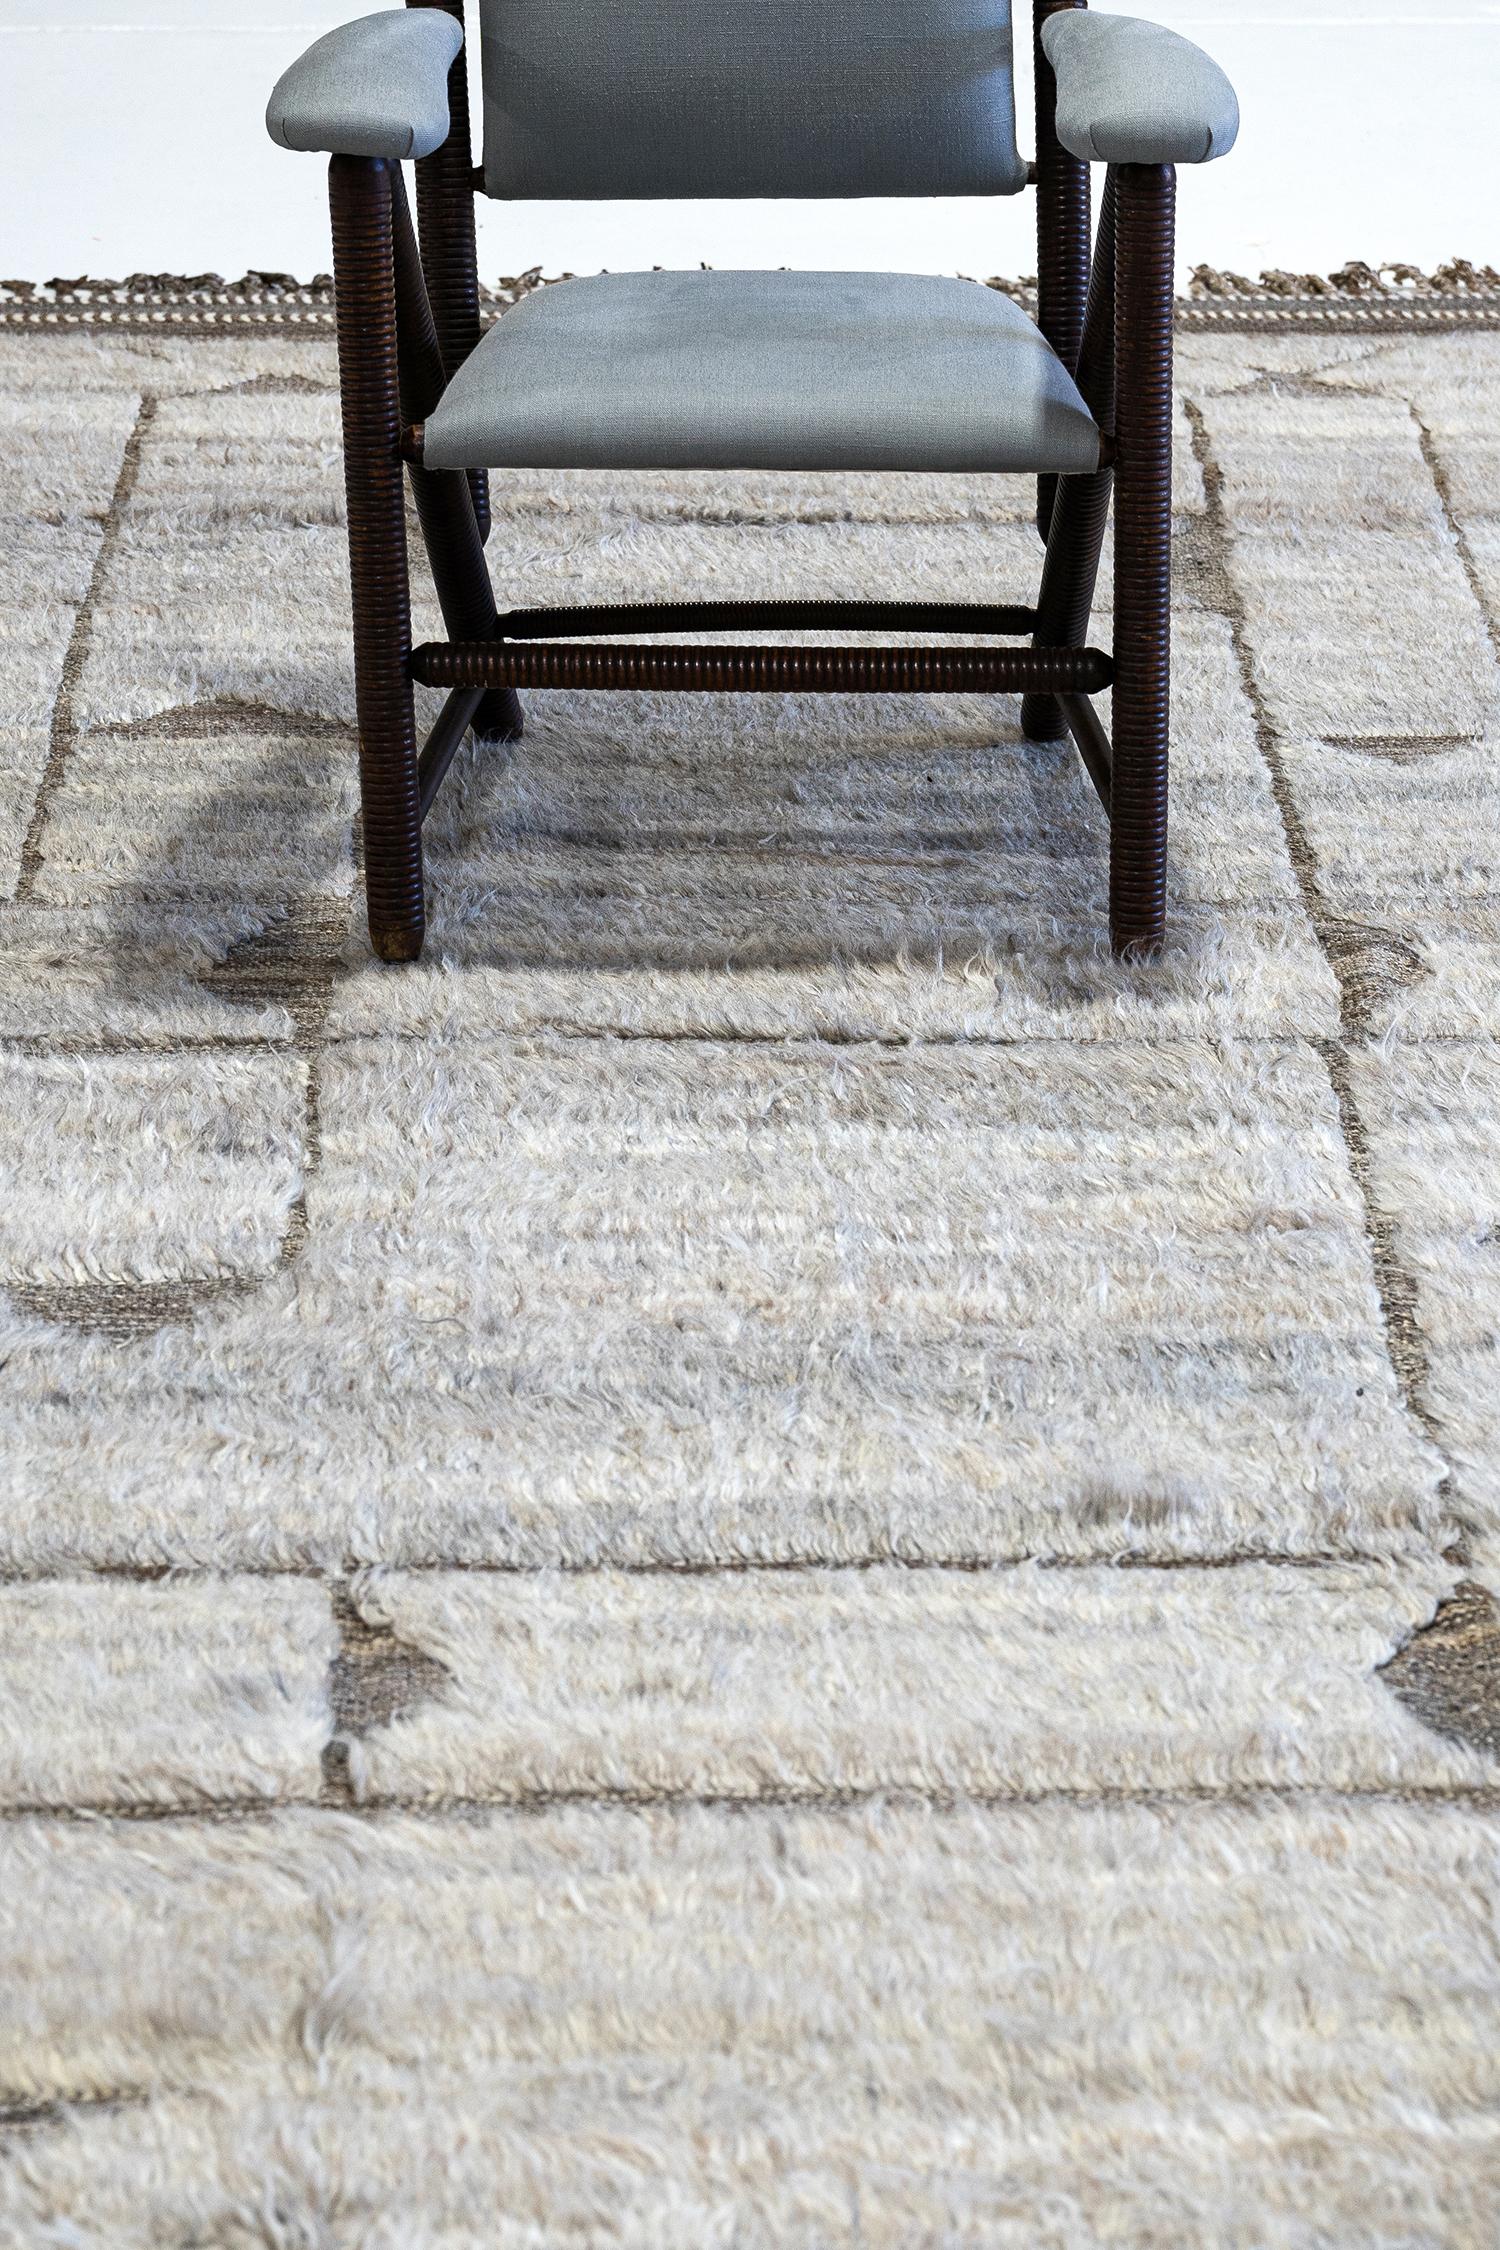 Essaouina' is a beautifully textured rug with embossed designs inspired from the Atlas Mountains of Morocco. Neutral brown motifs surrounded by a natural shag and tasseled borders make for a great contemporary interpretation for the modern design